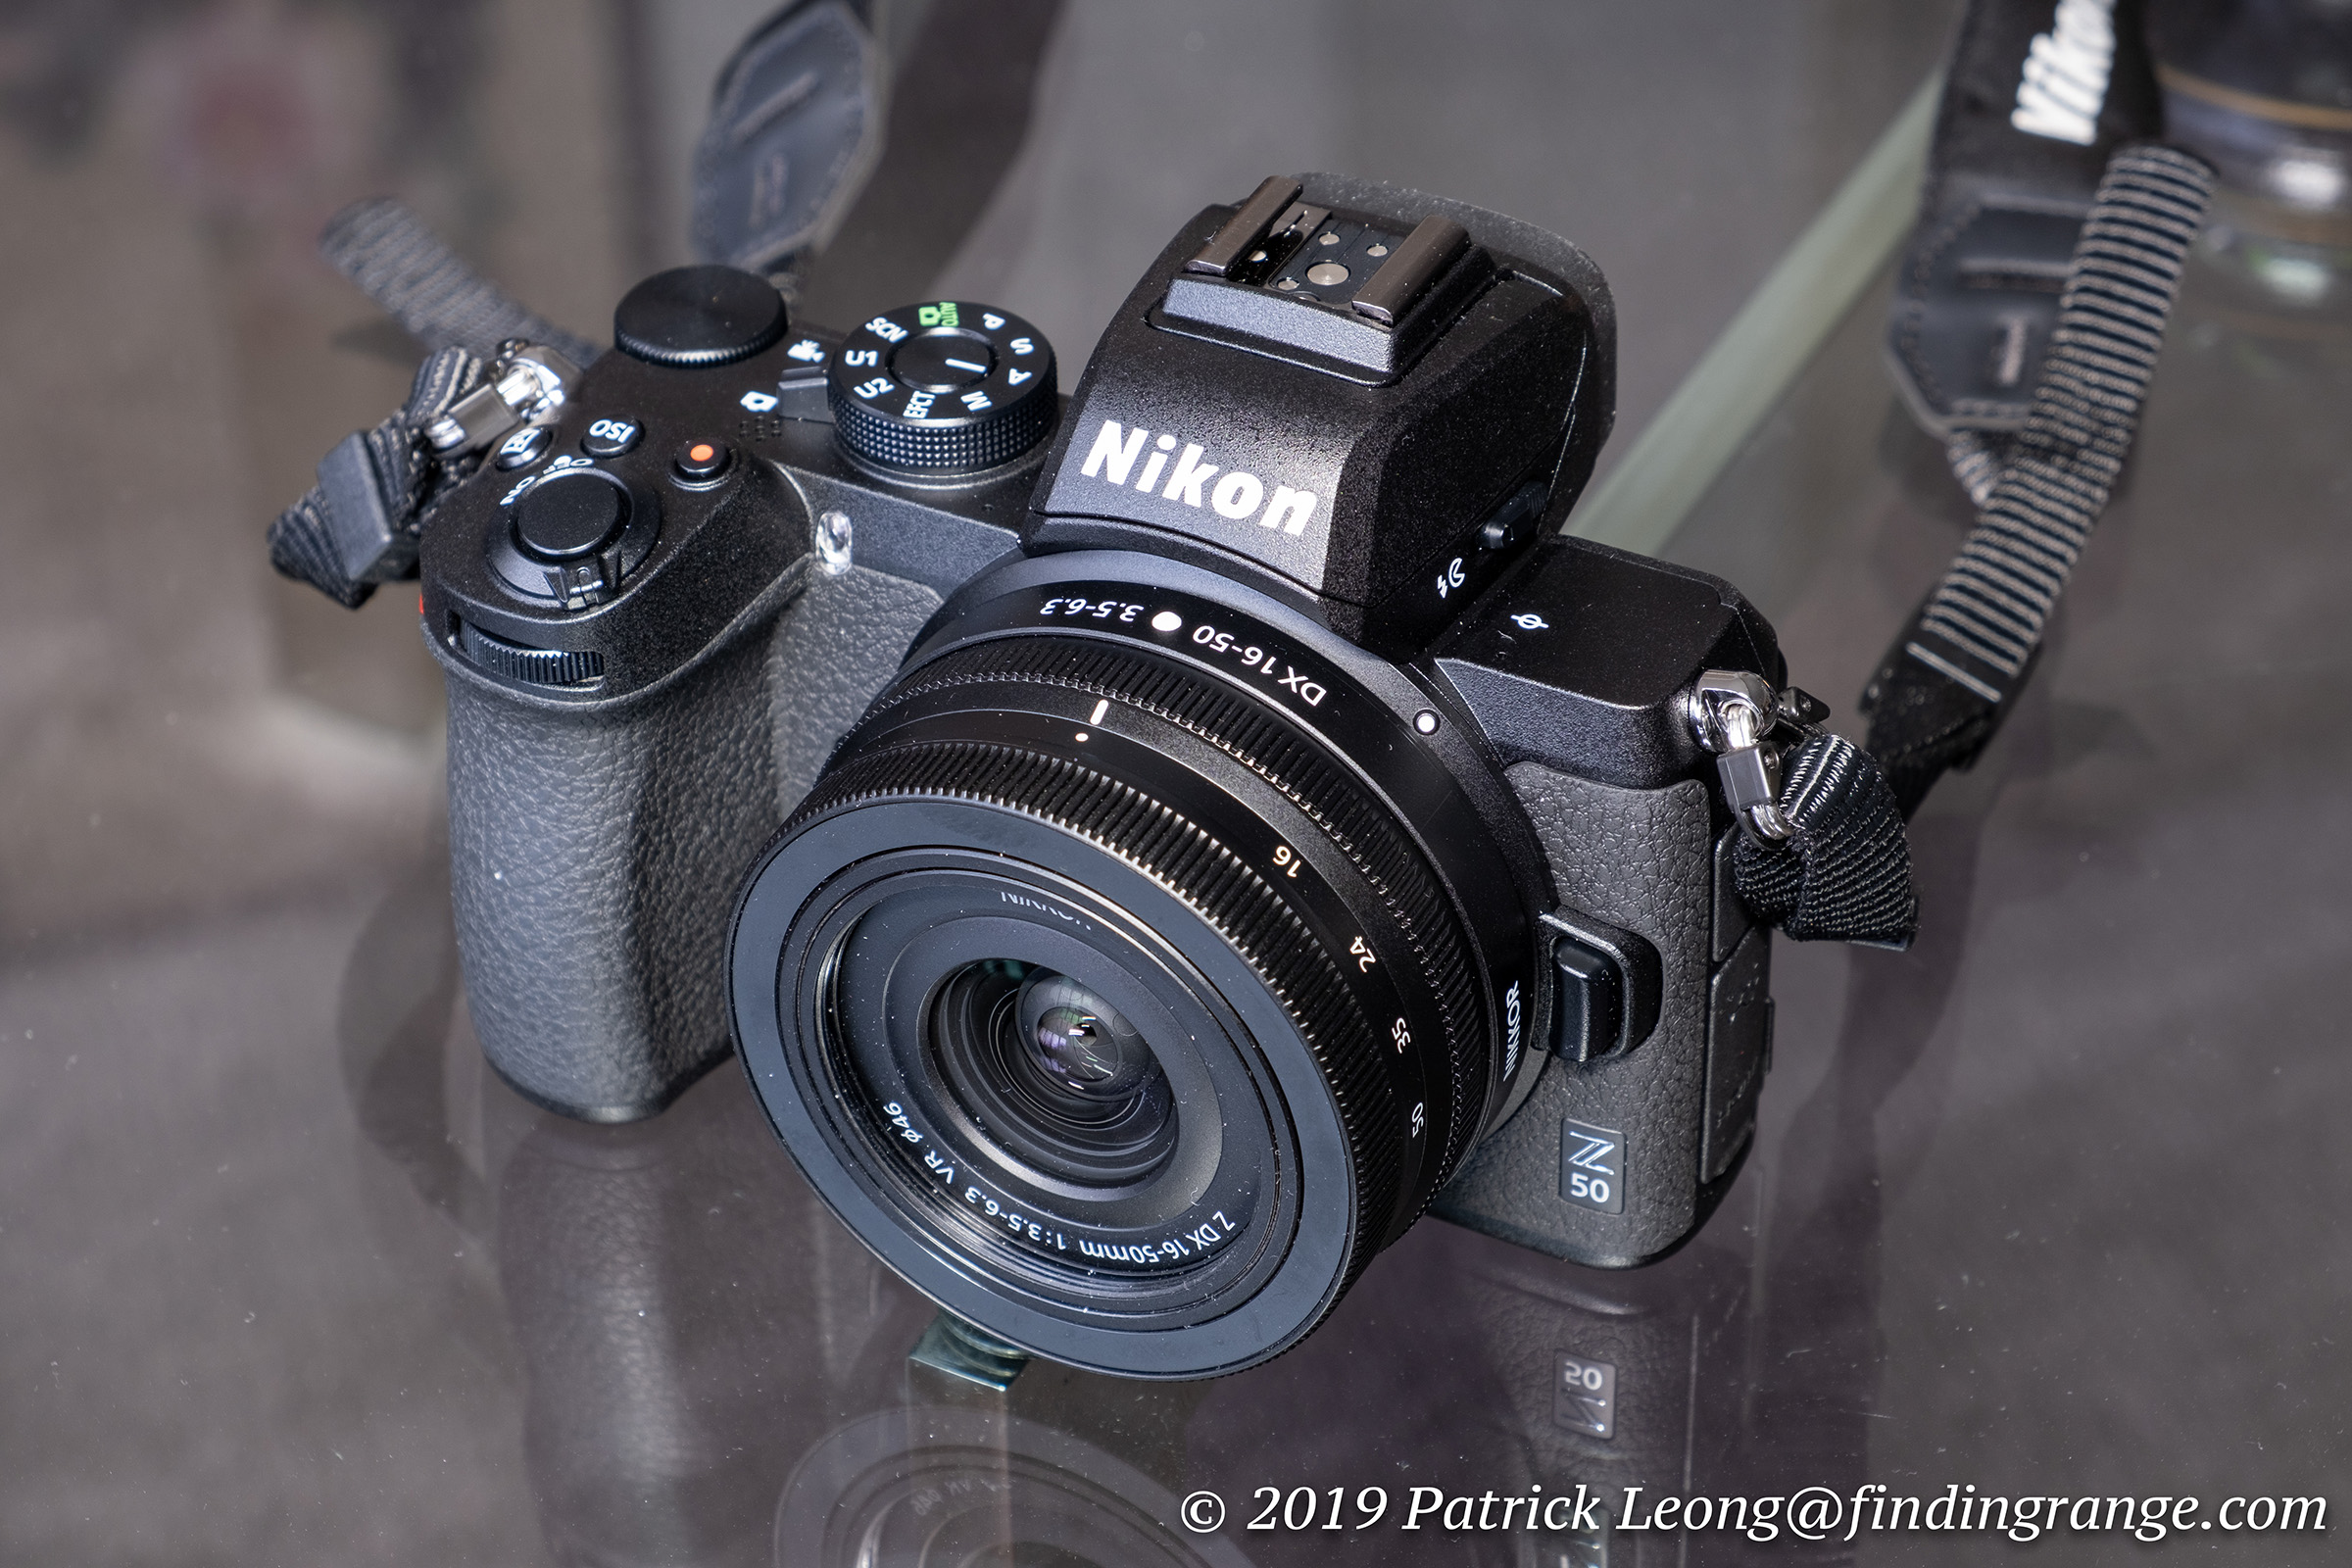 Nikon Z50 Review: Tiny 20.9MP Mirrorless Camera Offers Great